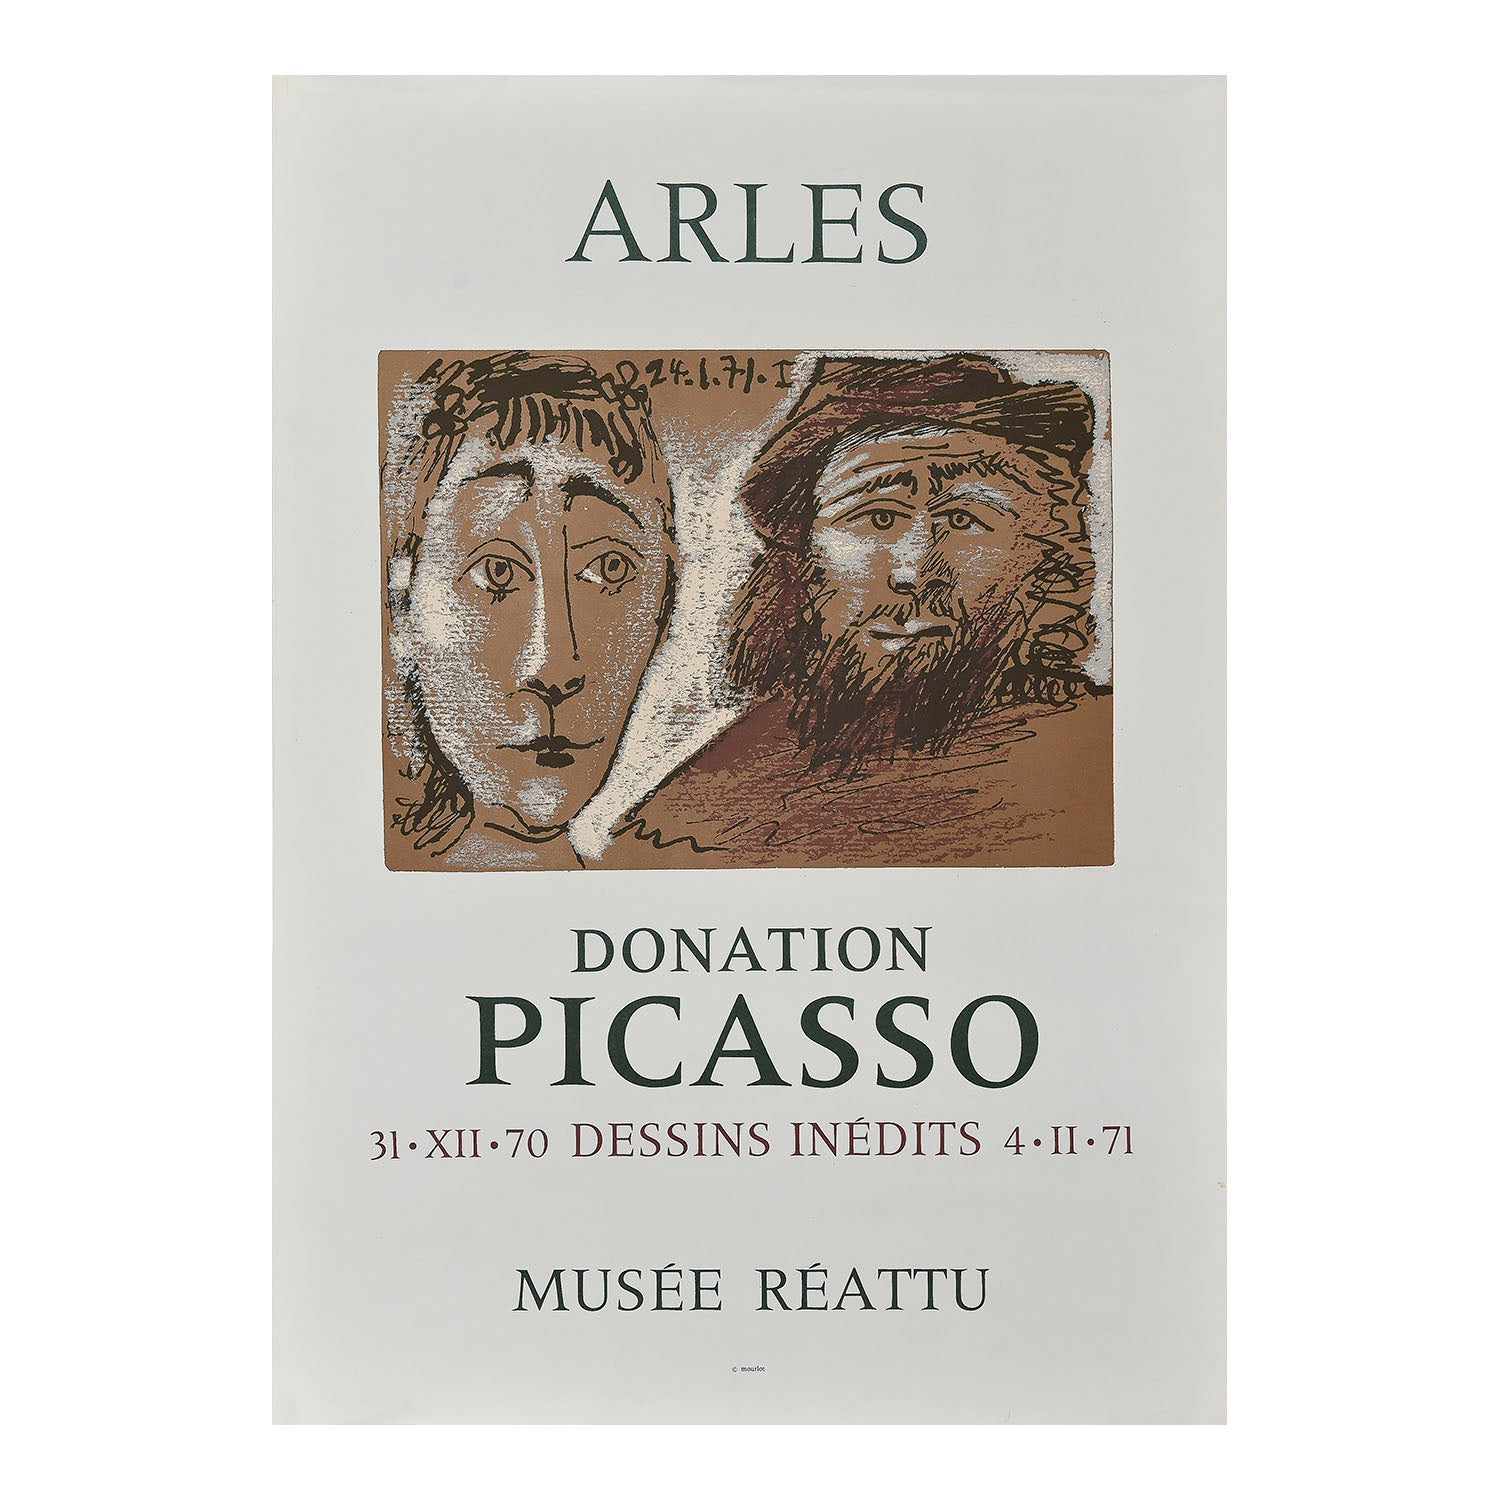 Original art exhibition poster, Donation Picasso Musée Réattu, Arles, 1971. The poster promotes the donation of 57 recent works by Pablo Picasso to the Musée Réattu in Arles, southern France.